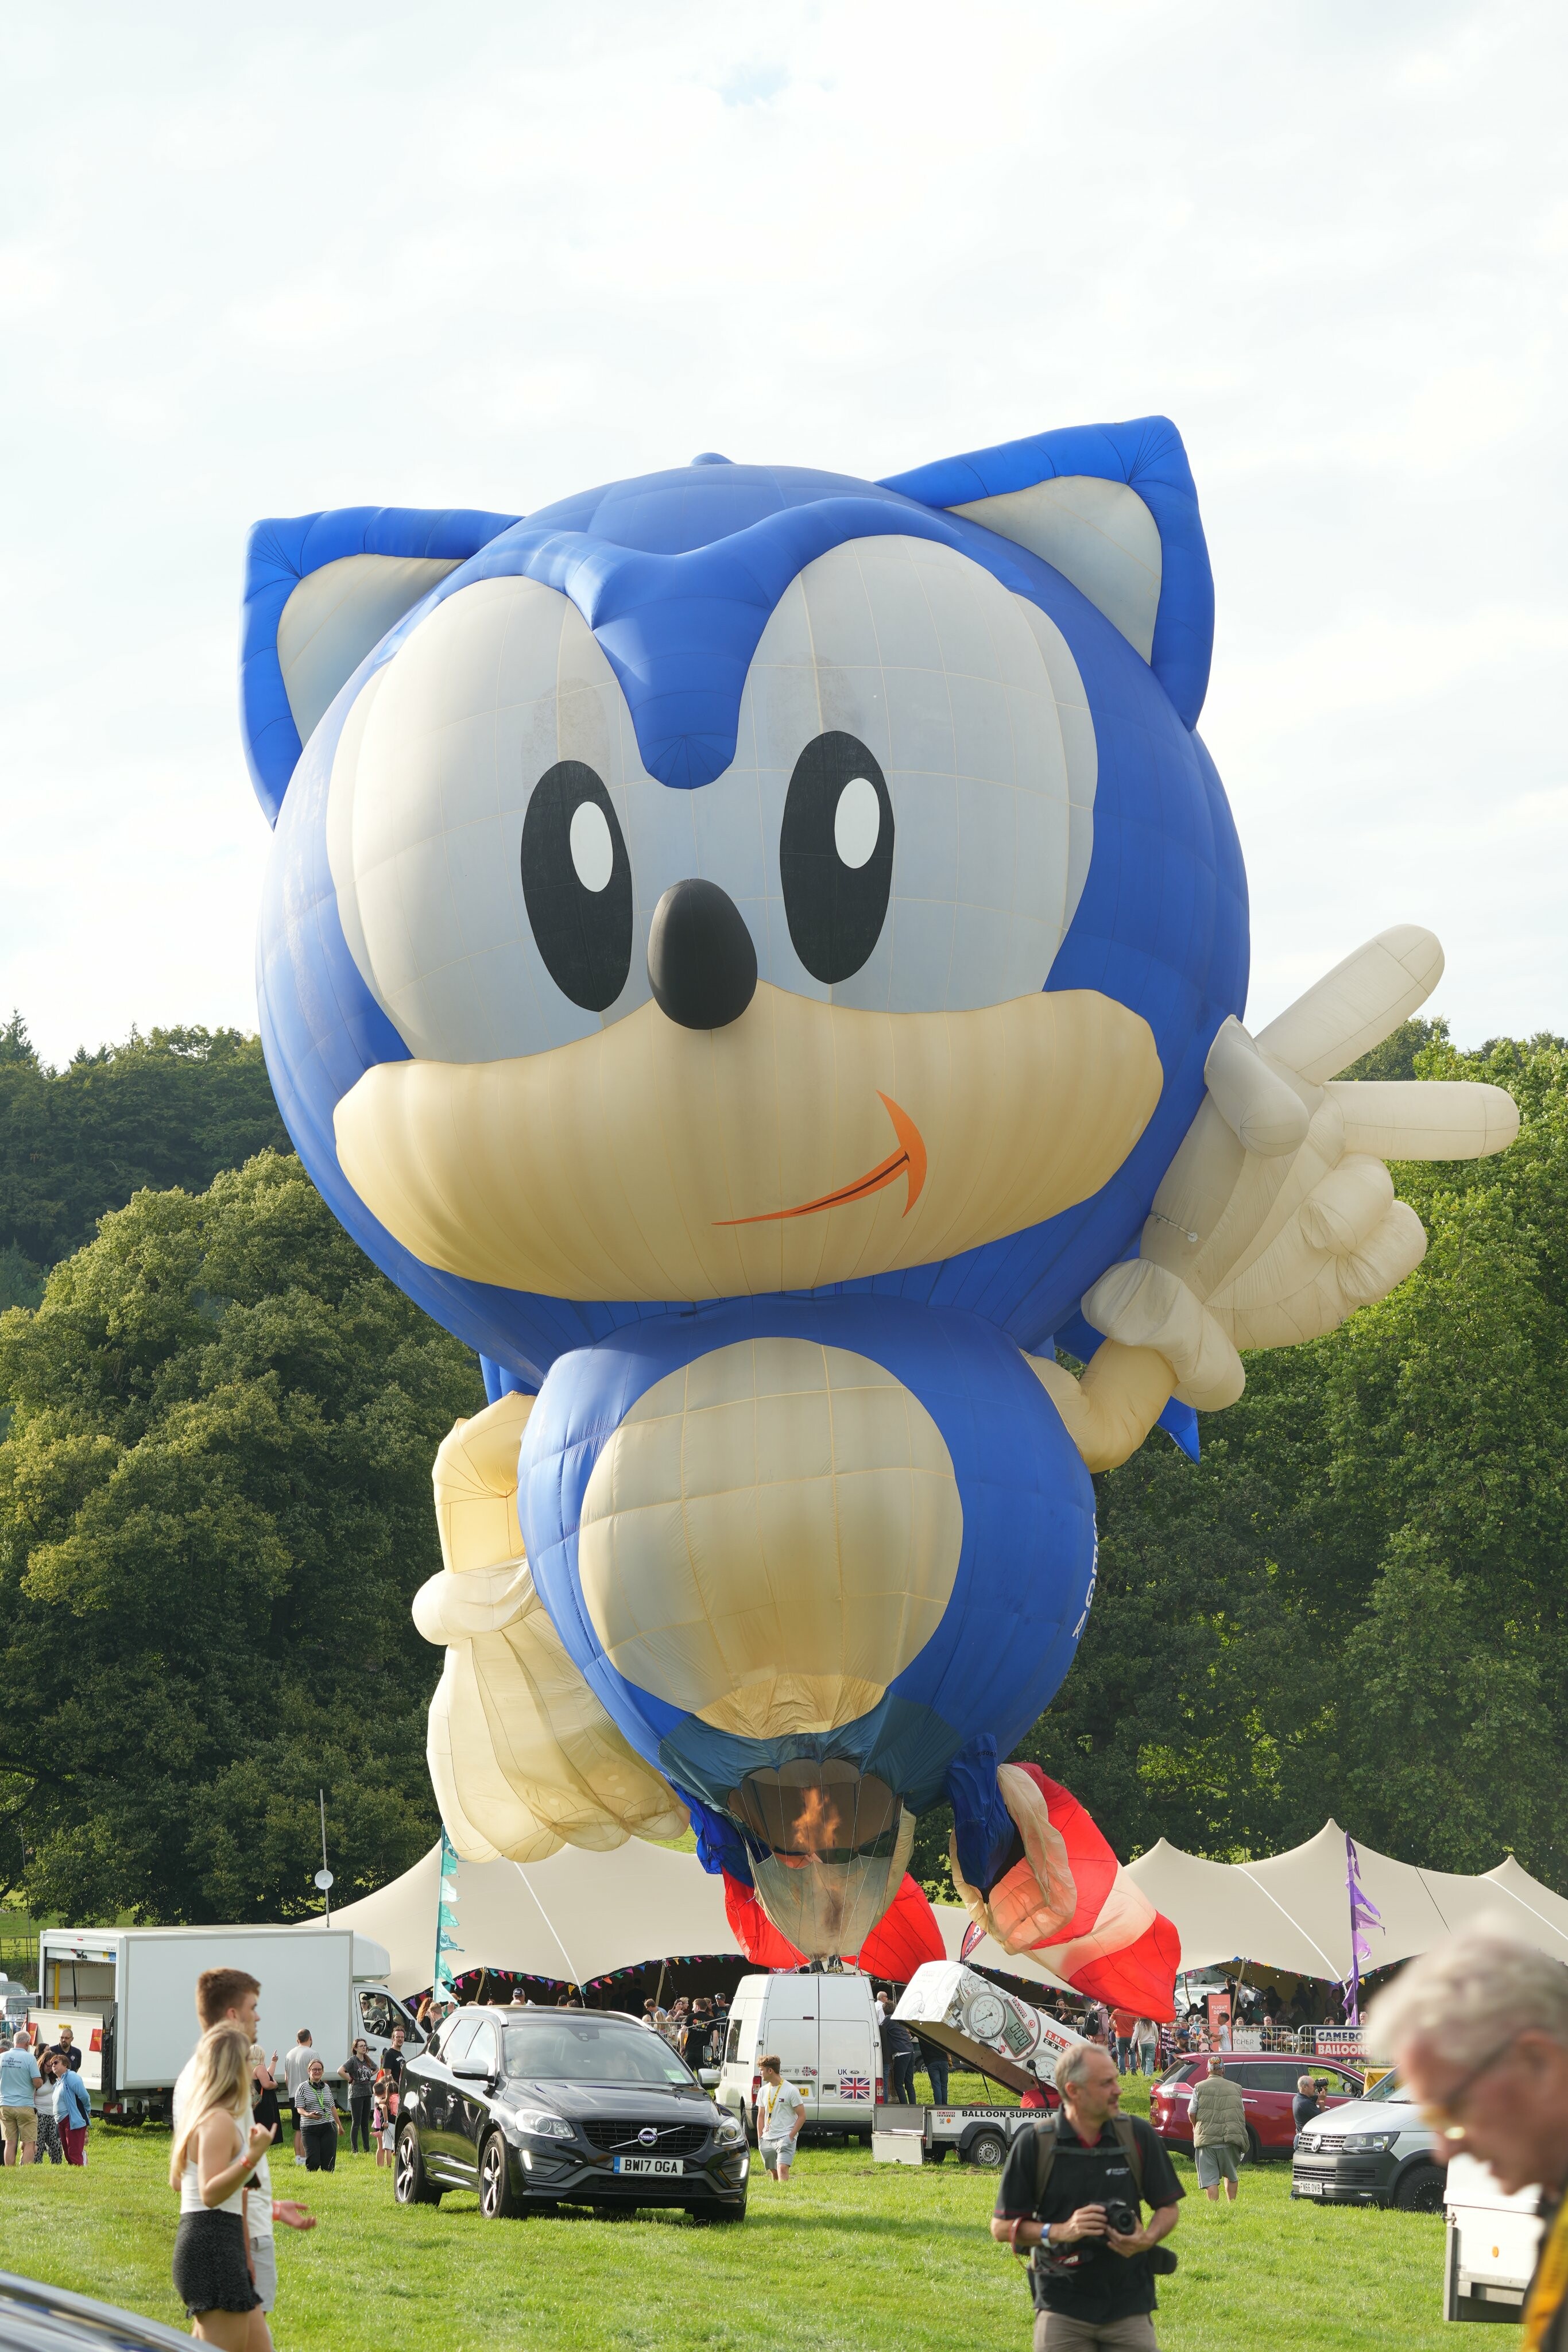 Sonic The Hedgehog - This summer's hottest music festival!